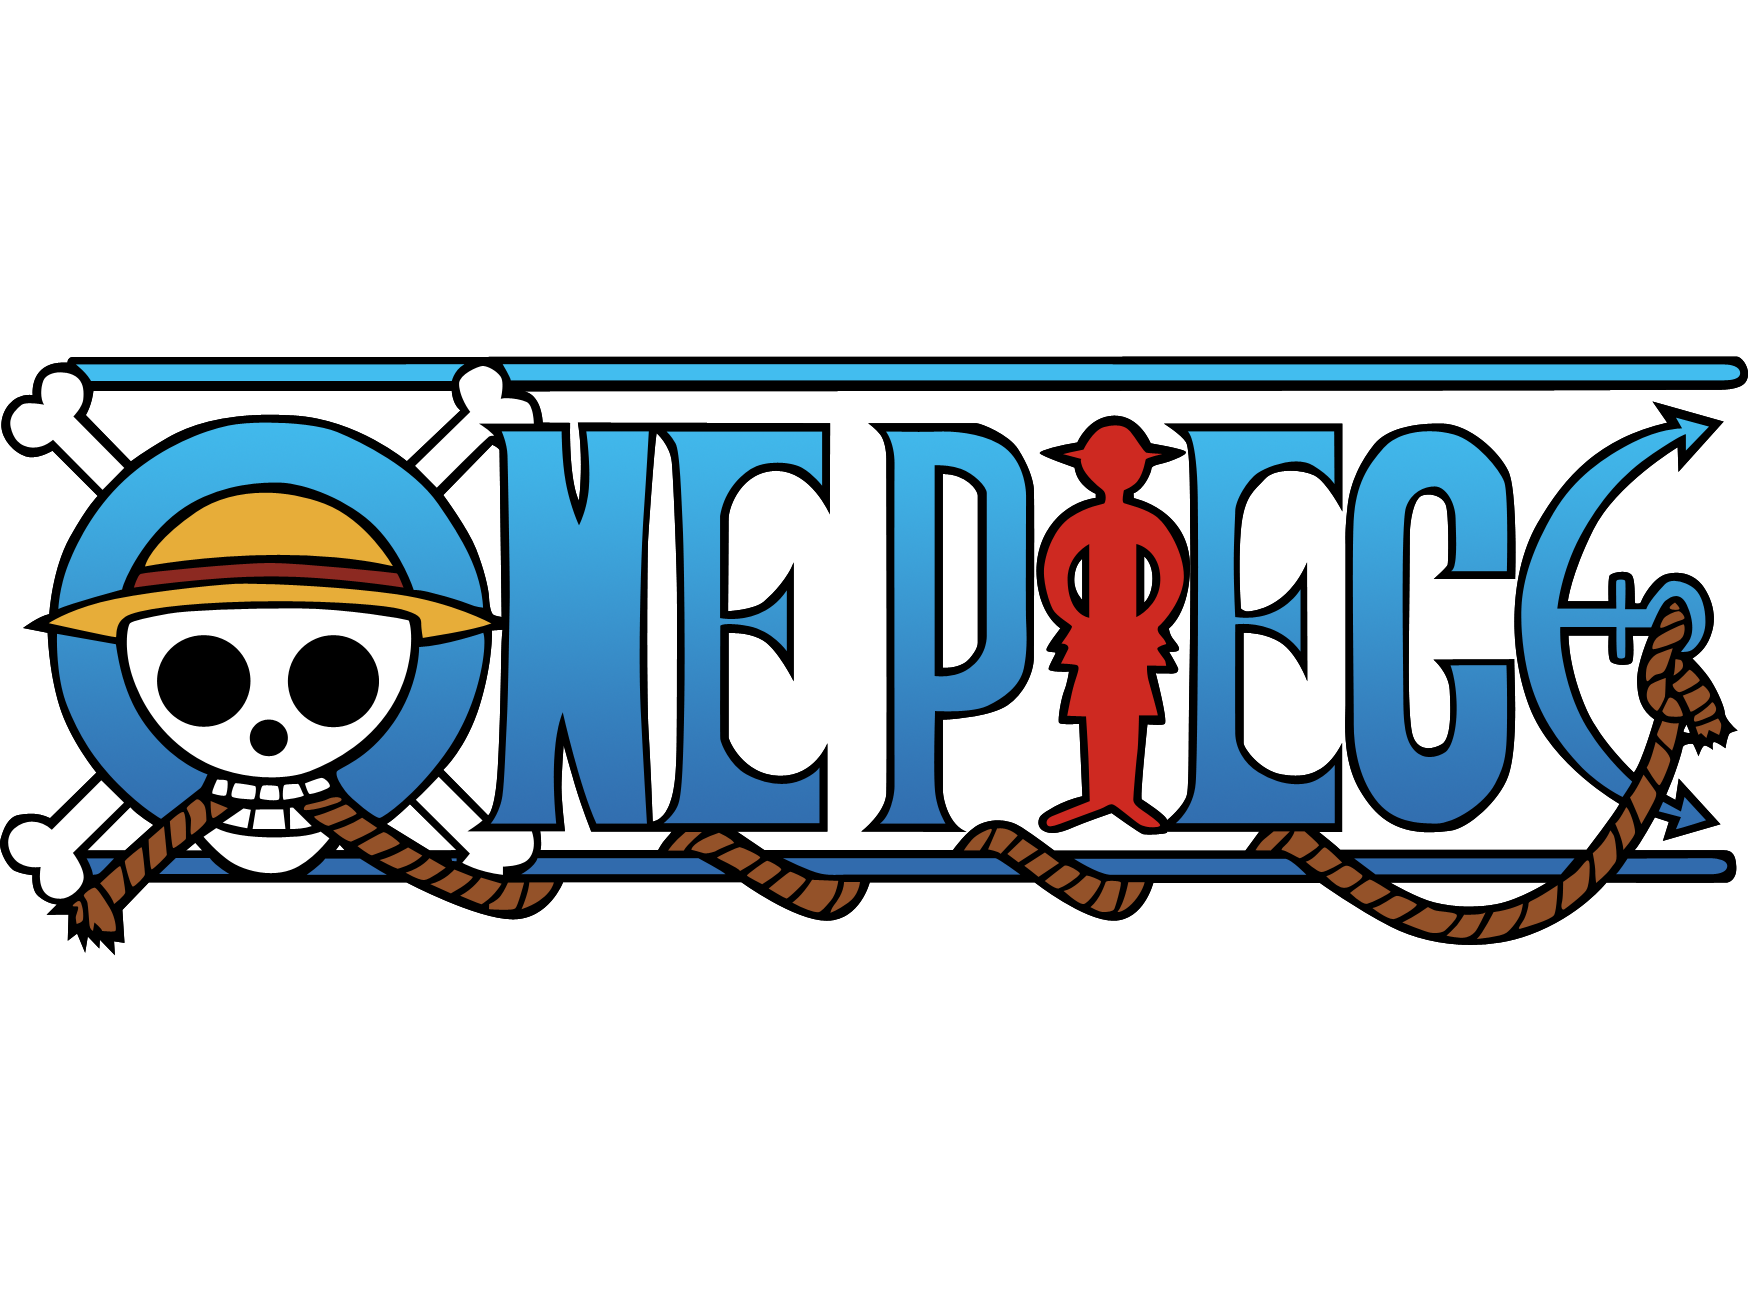 One Piece Character Guide